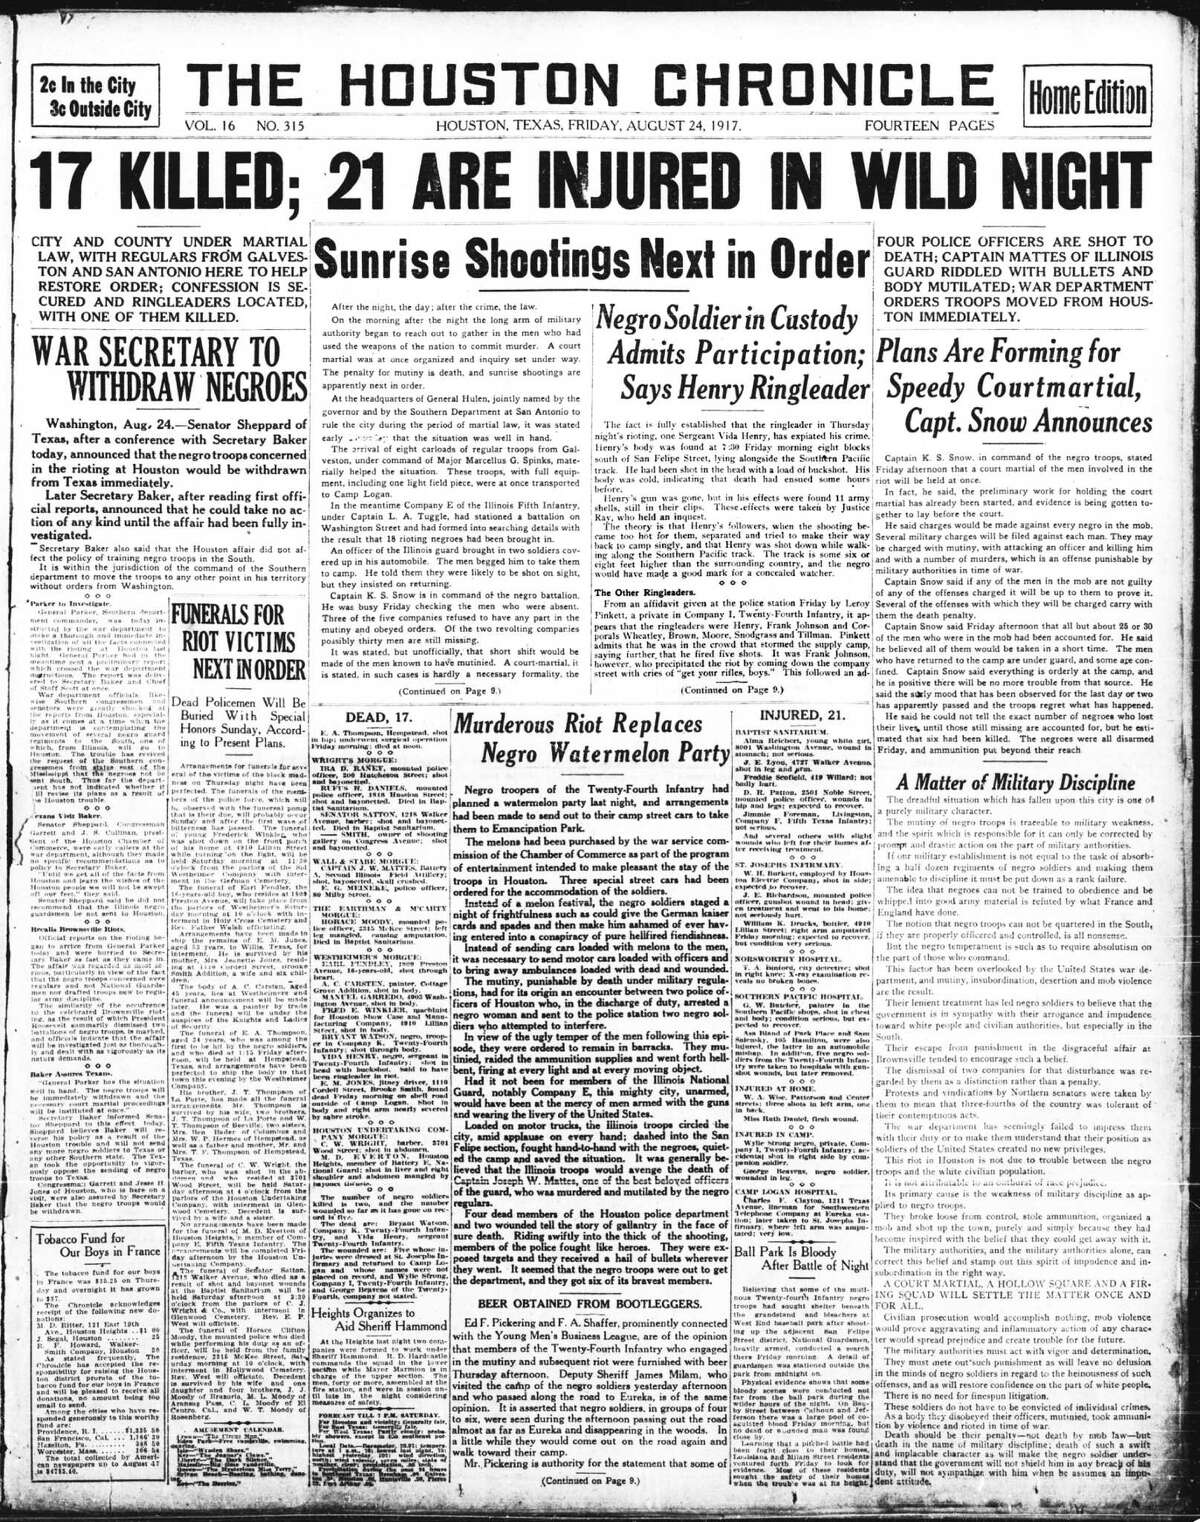 Houston Chronicle front page, August 24, 1917.